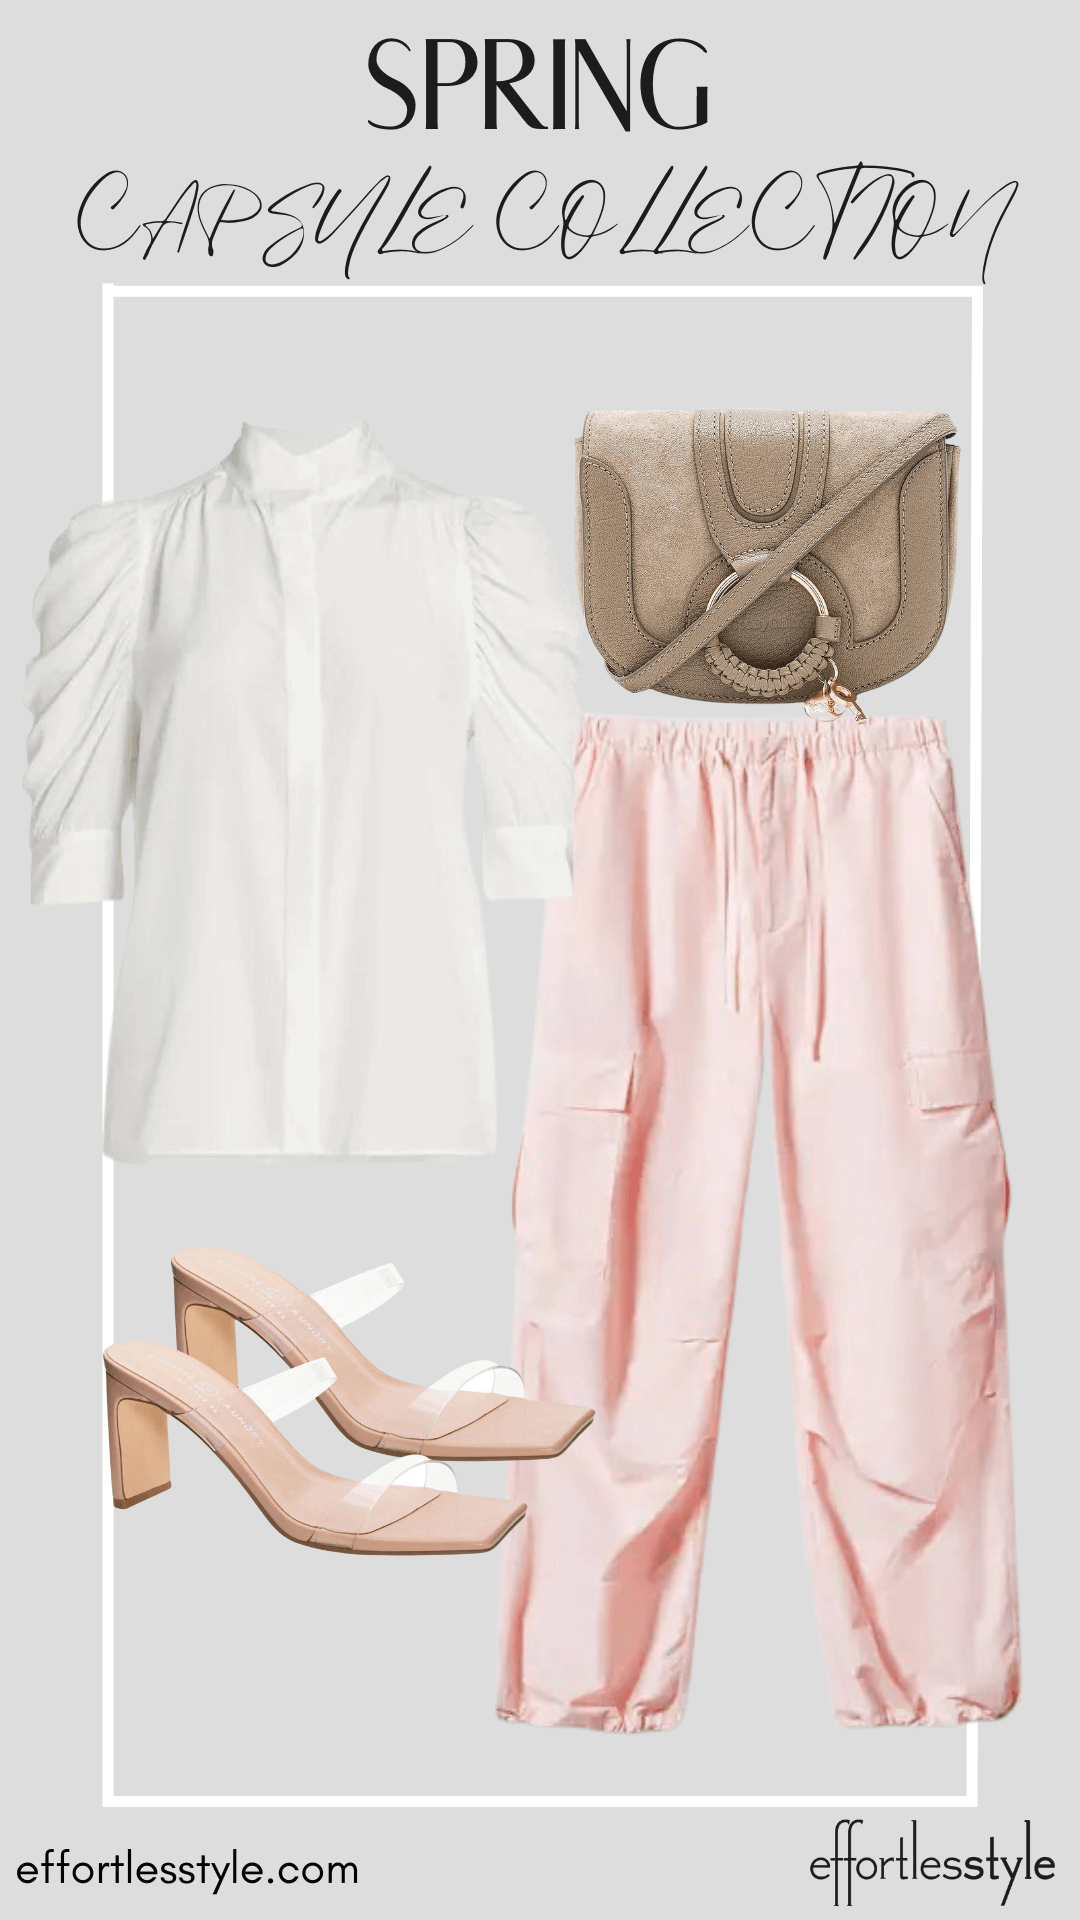 How To Wear Our Spring Capsule Wardrobe - Part 1 Short Sleeve Blouse & Cargo Pants how to dress cargo pants up for a night out how to wear heels with cargo pants how to style your cargo pants this spring must have shoes for spring